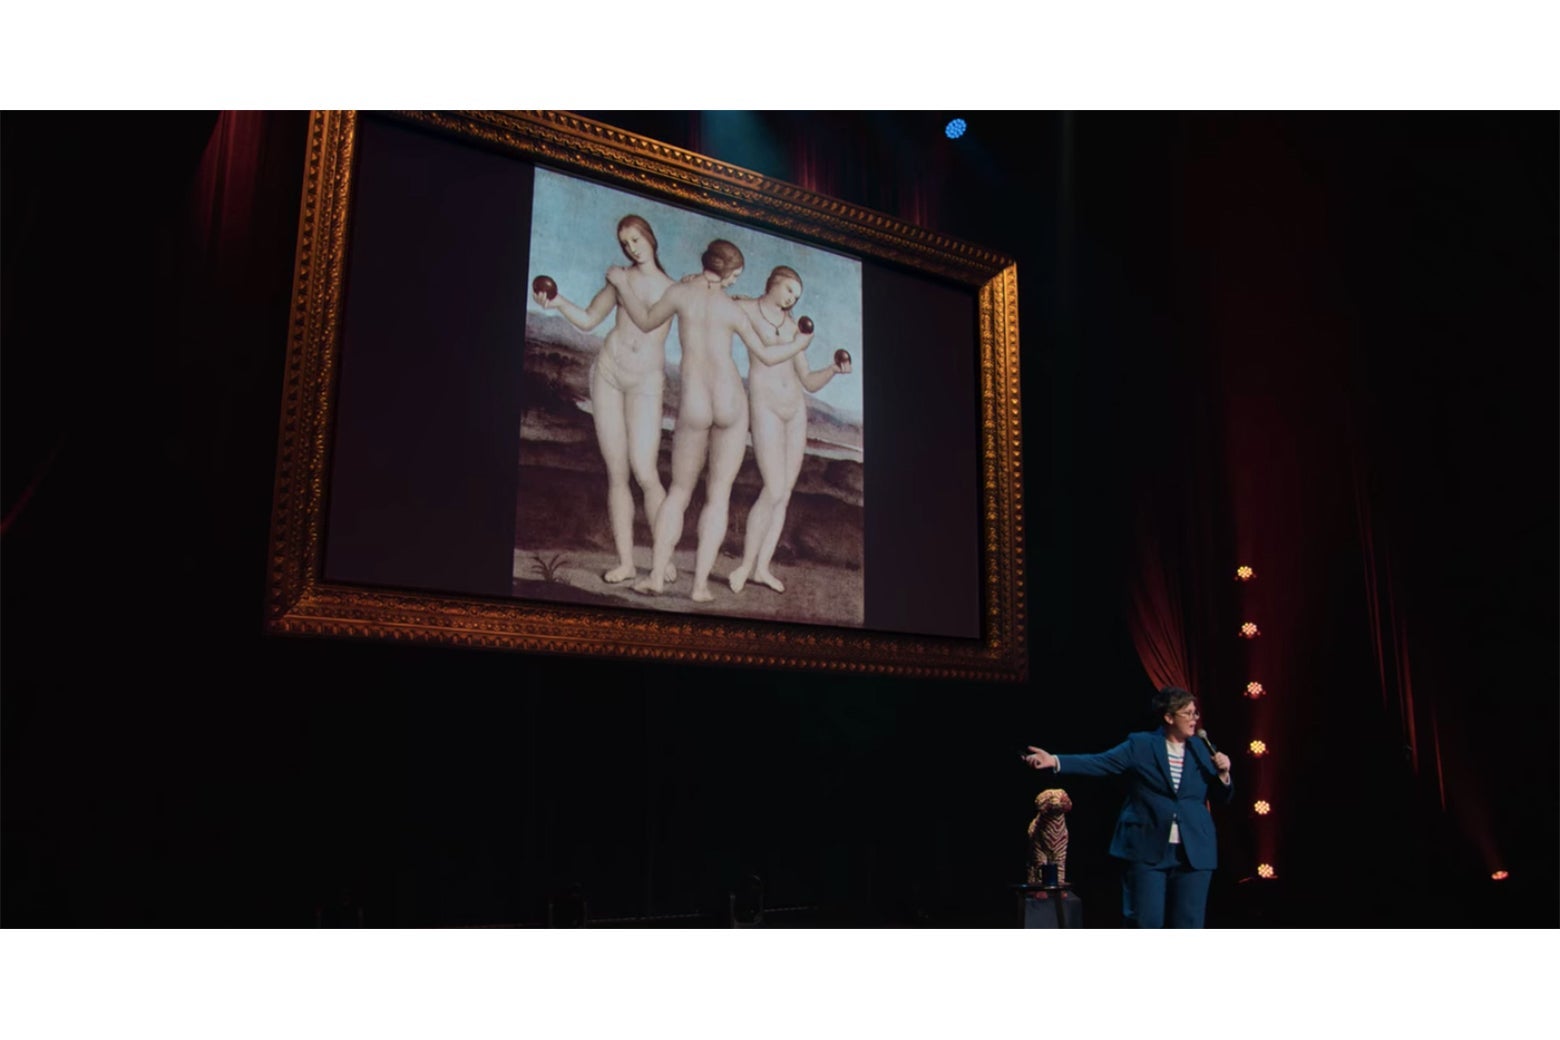 Hannah Gadsby standing in front of an image of Raphael's Three Graces.